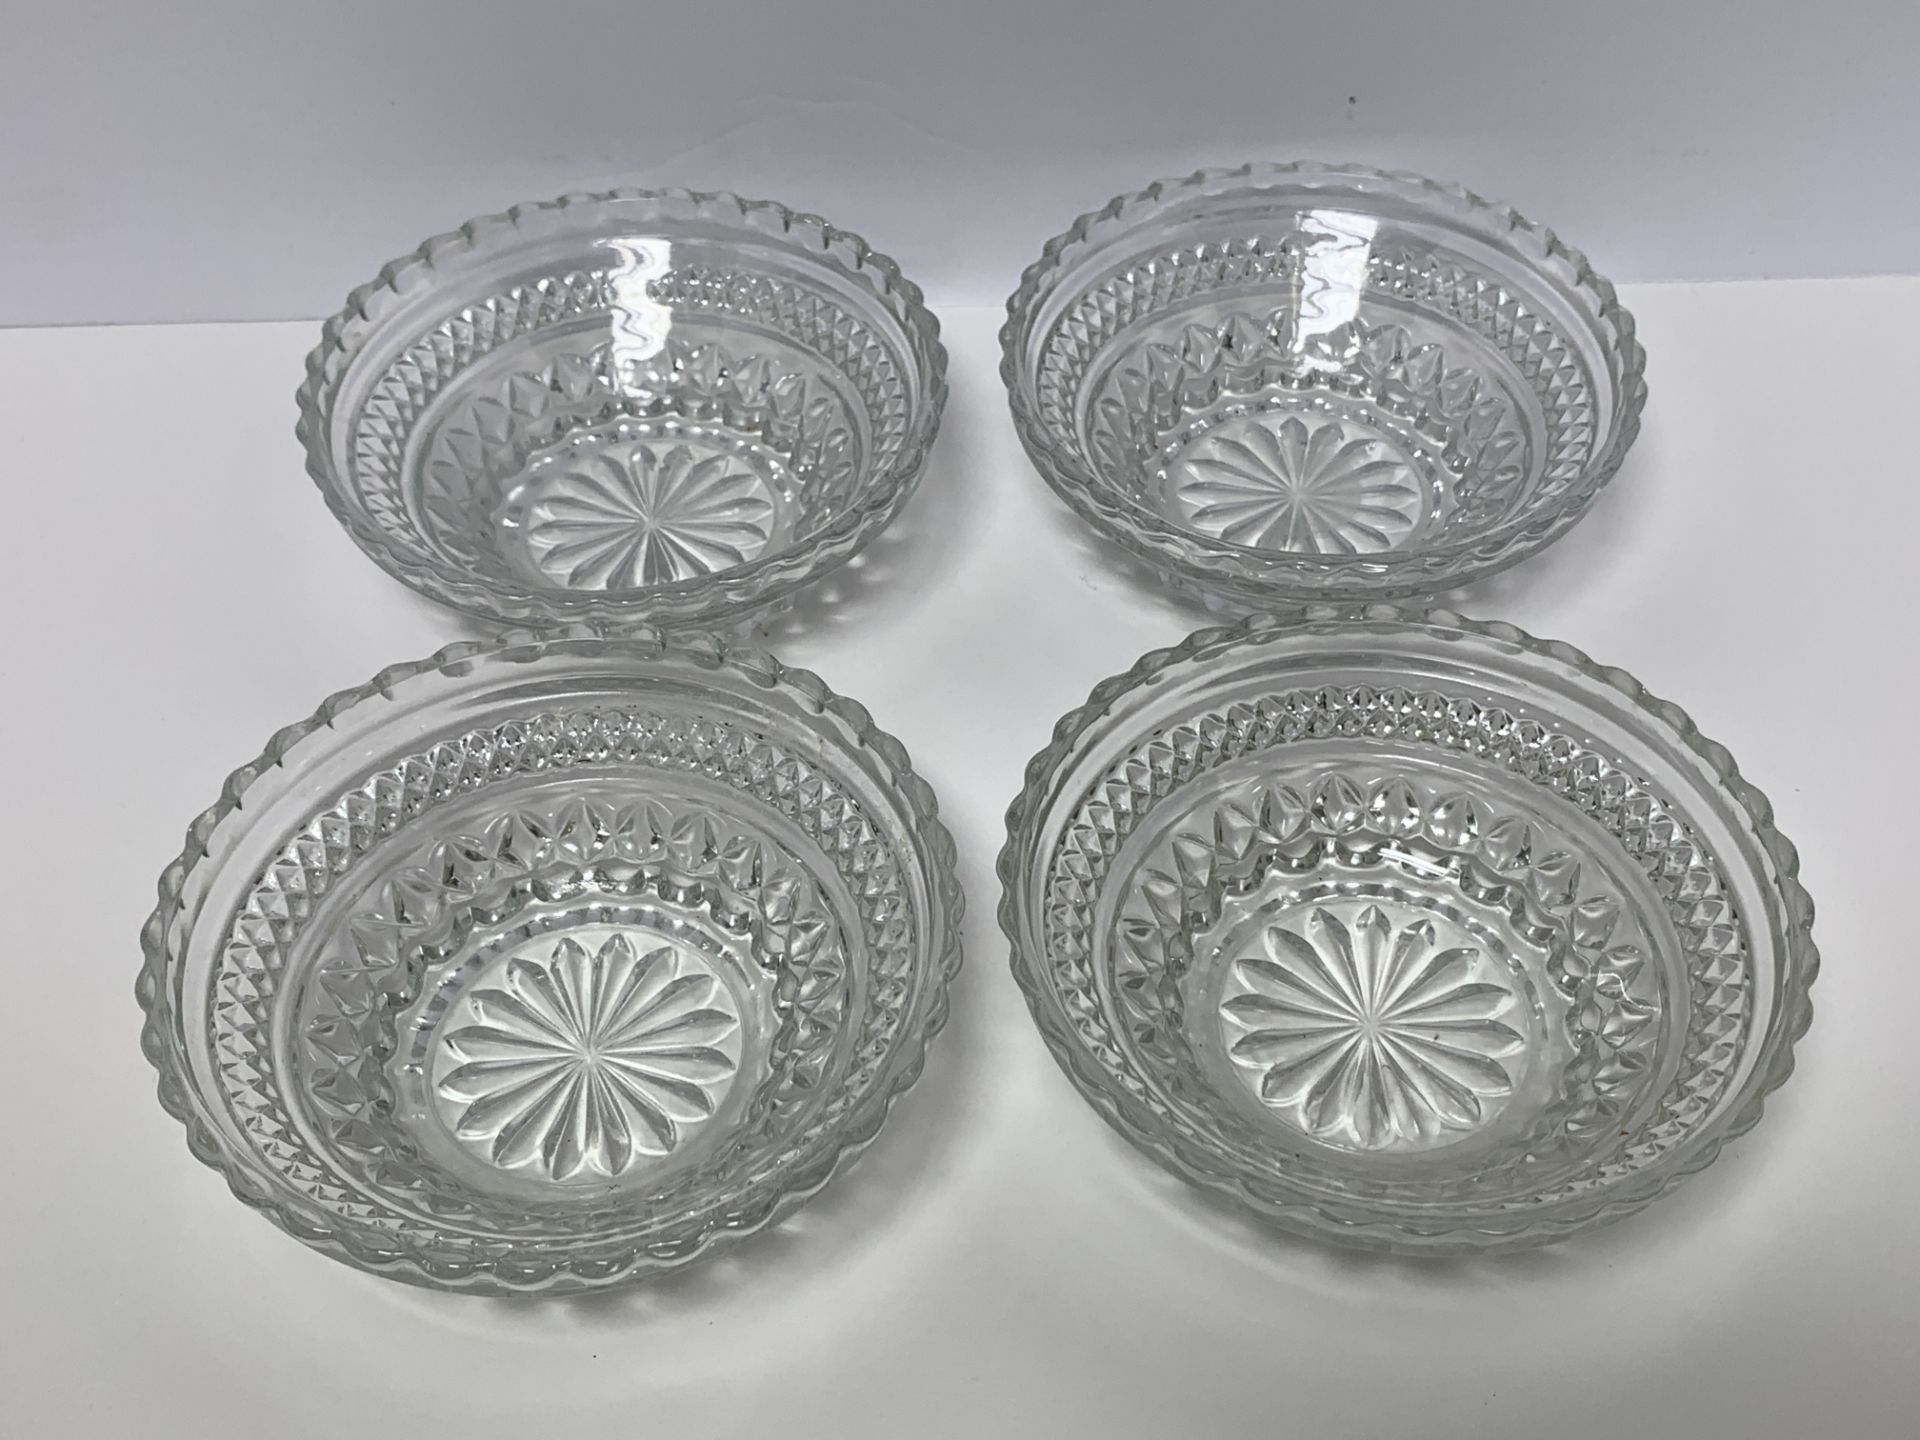 SET OF 5 ANTIQUE CRYSTAL BOWLS WITH DIAMOND CUT DETAILS - Image 5 of 8